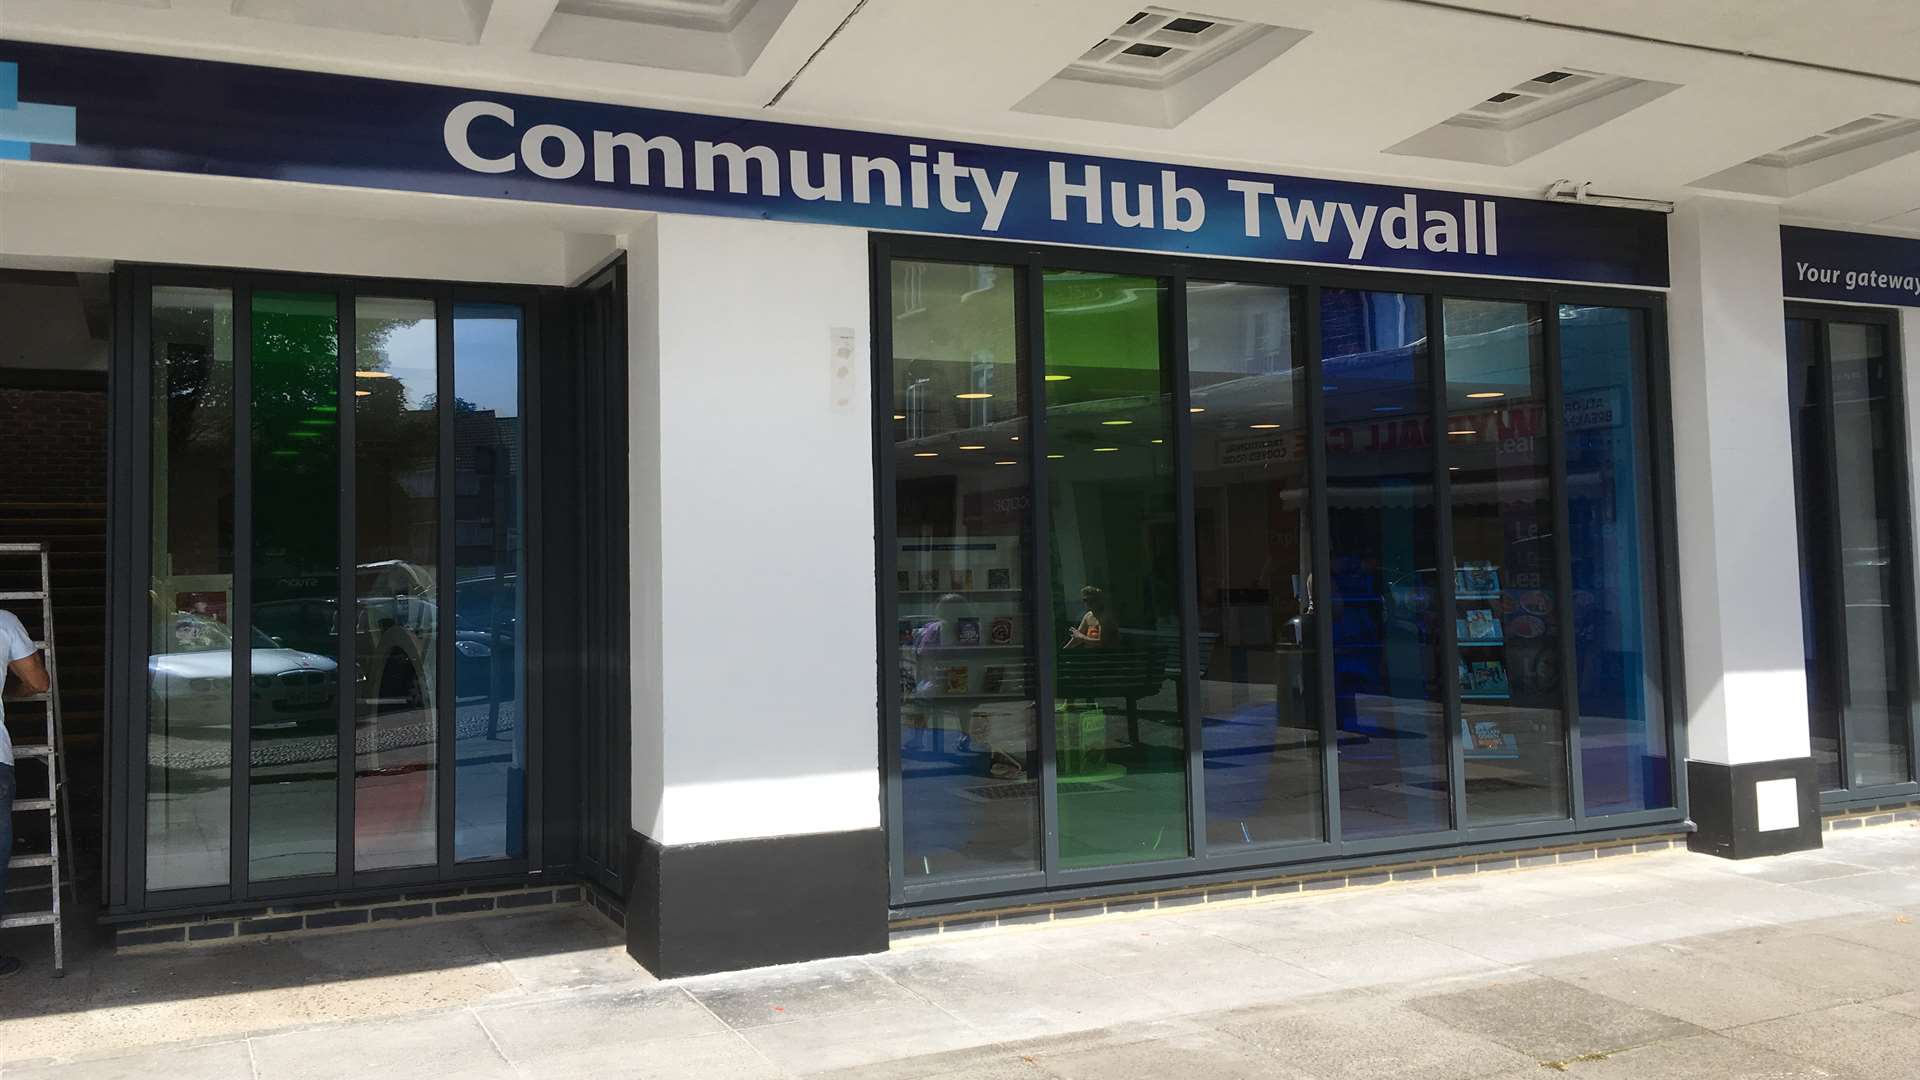 The Twydall Neighborhood Community Hub, which opened today